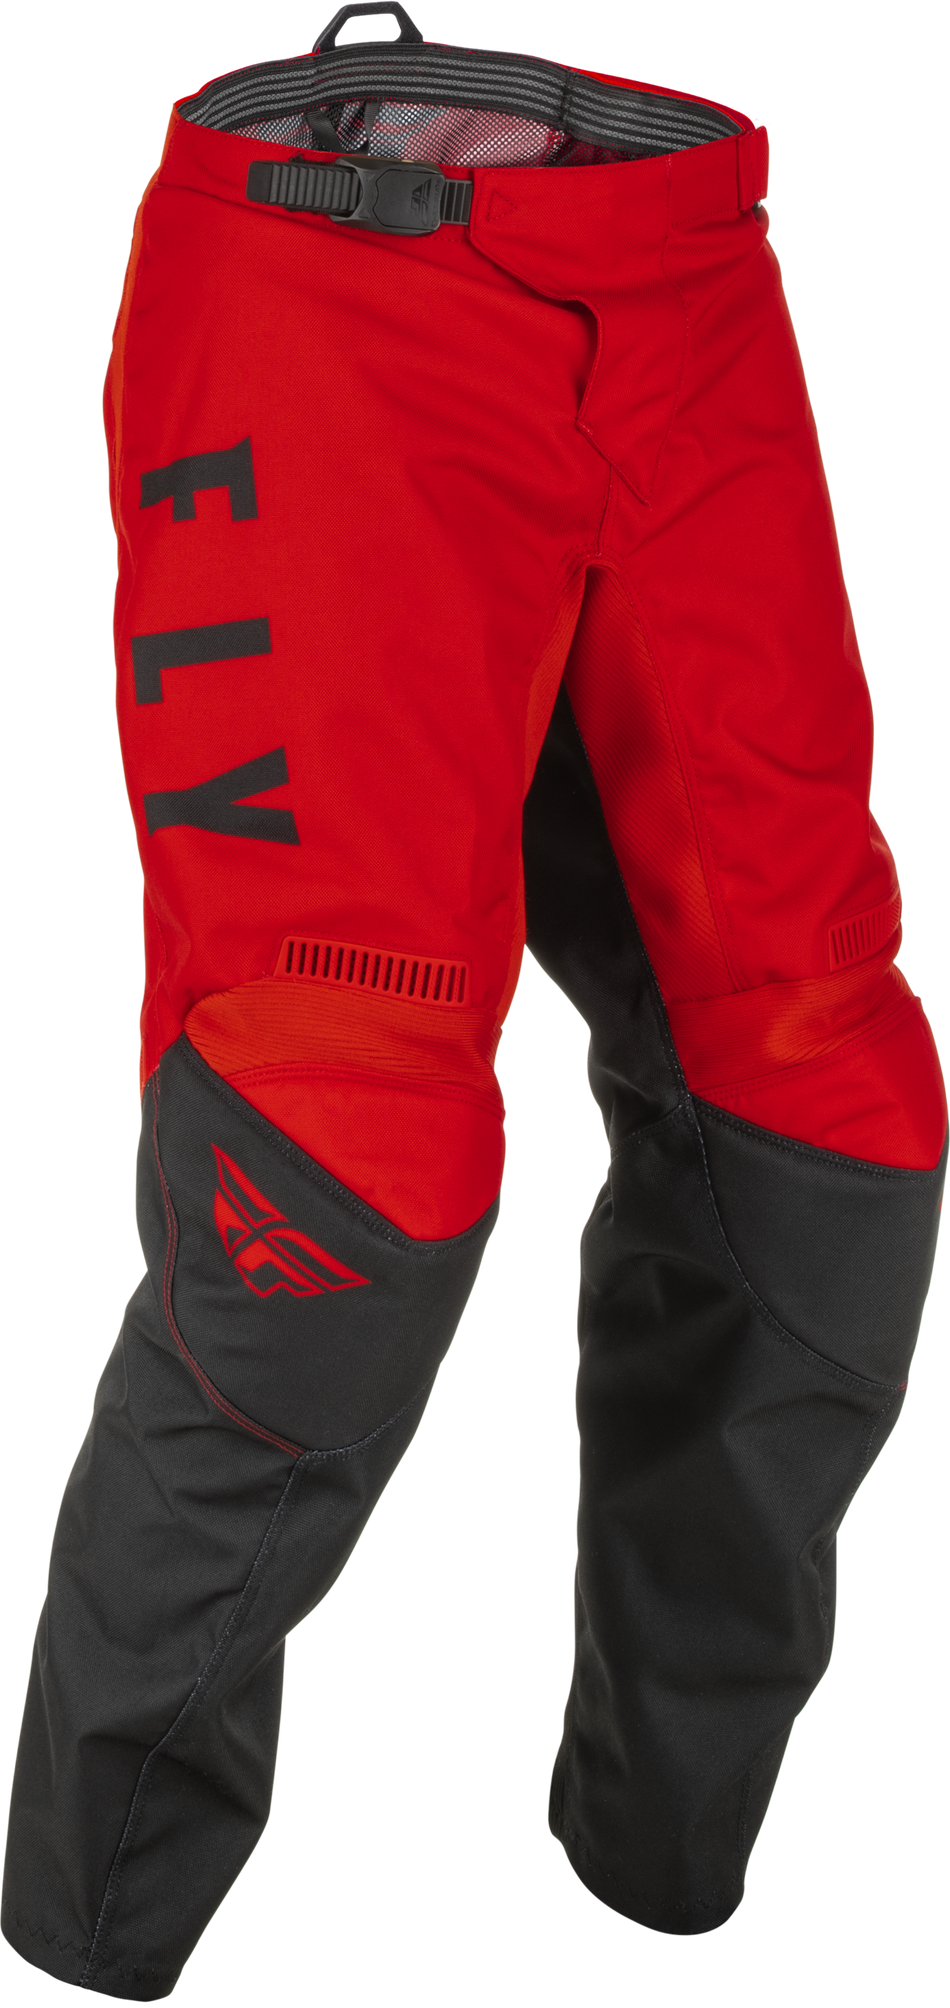 FLY RACING Youth F-16 Pants Red/Black Sz 22 375-93322